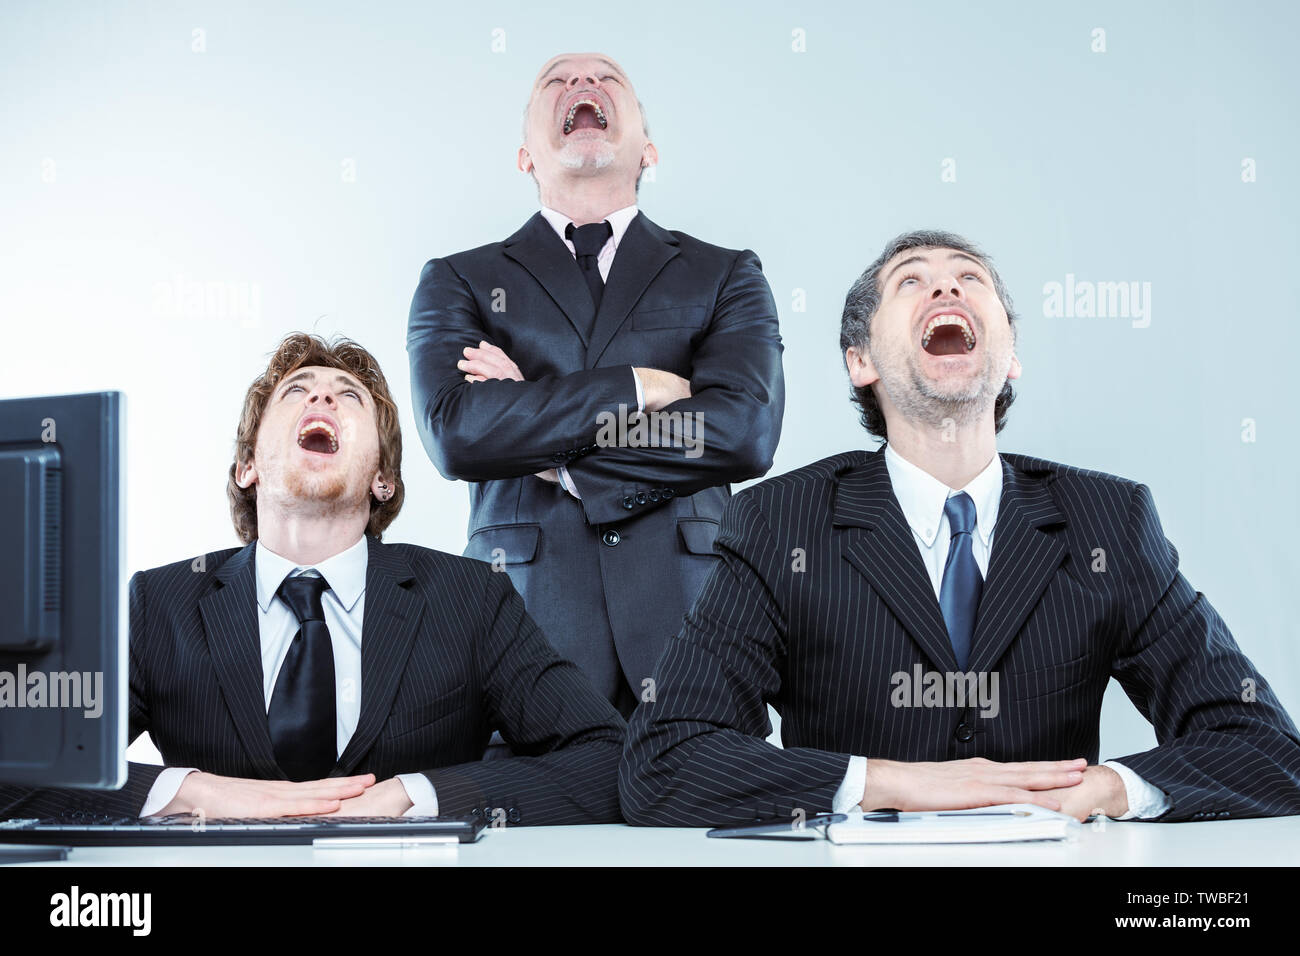 Three businessmen laughing or gawping as they look up at the ceiling in unison with wide open mouths during a meeting Stock Photo